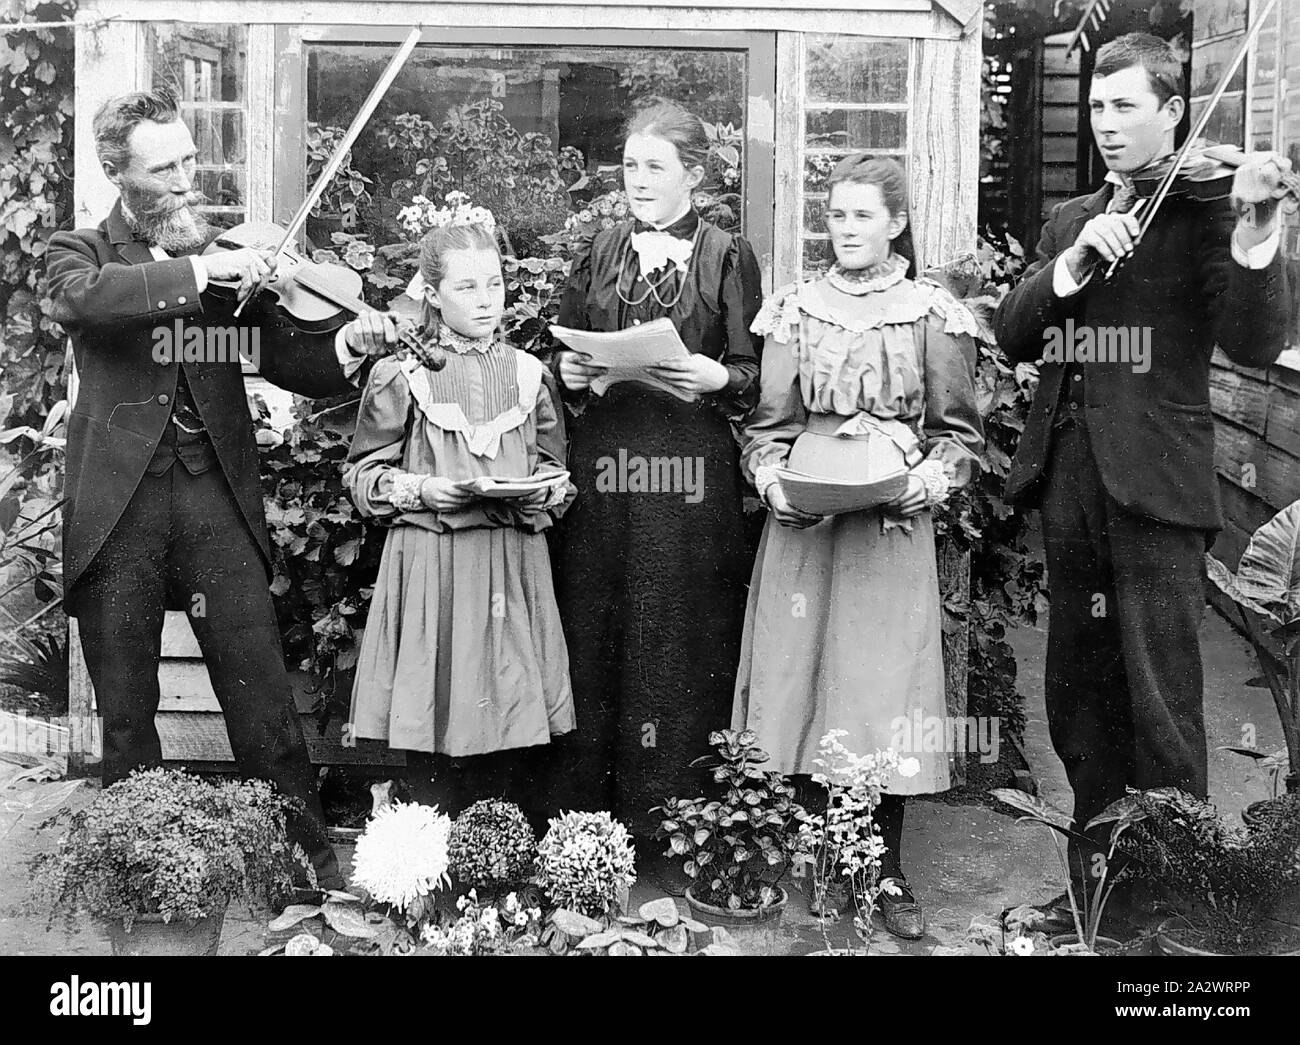 Negative - Merino District (?), Victoria, pre 1910, A family musical group in a garden. The two men play violins while the woman and two young girls sing. The singers are holding scores Stock Photo